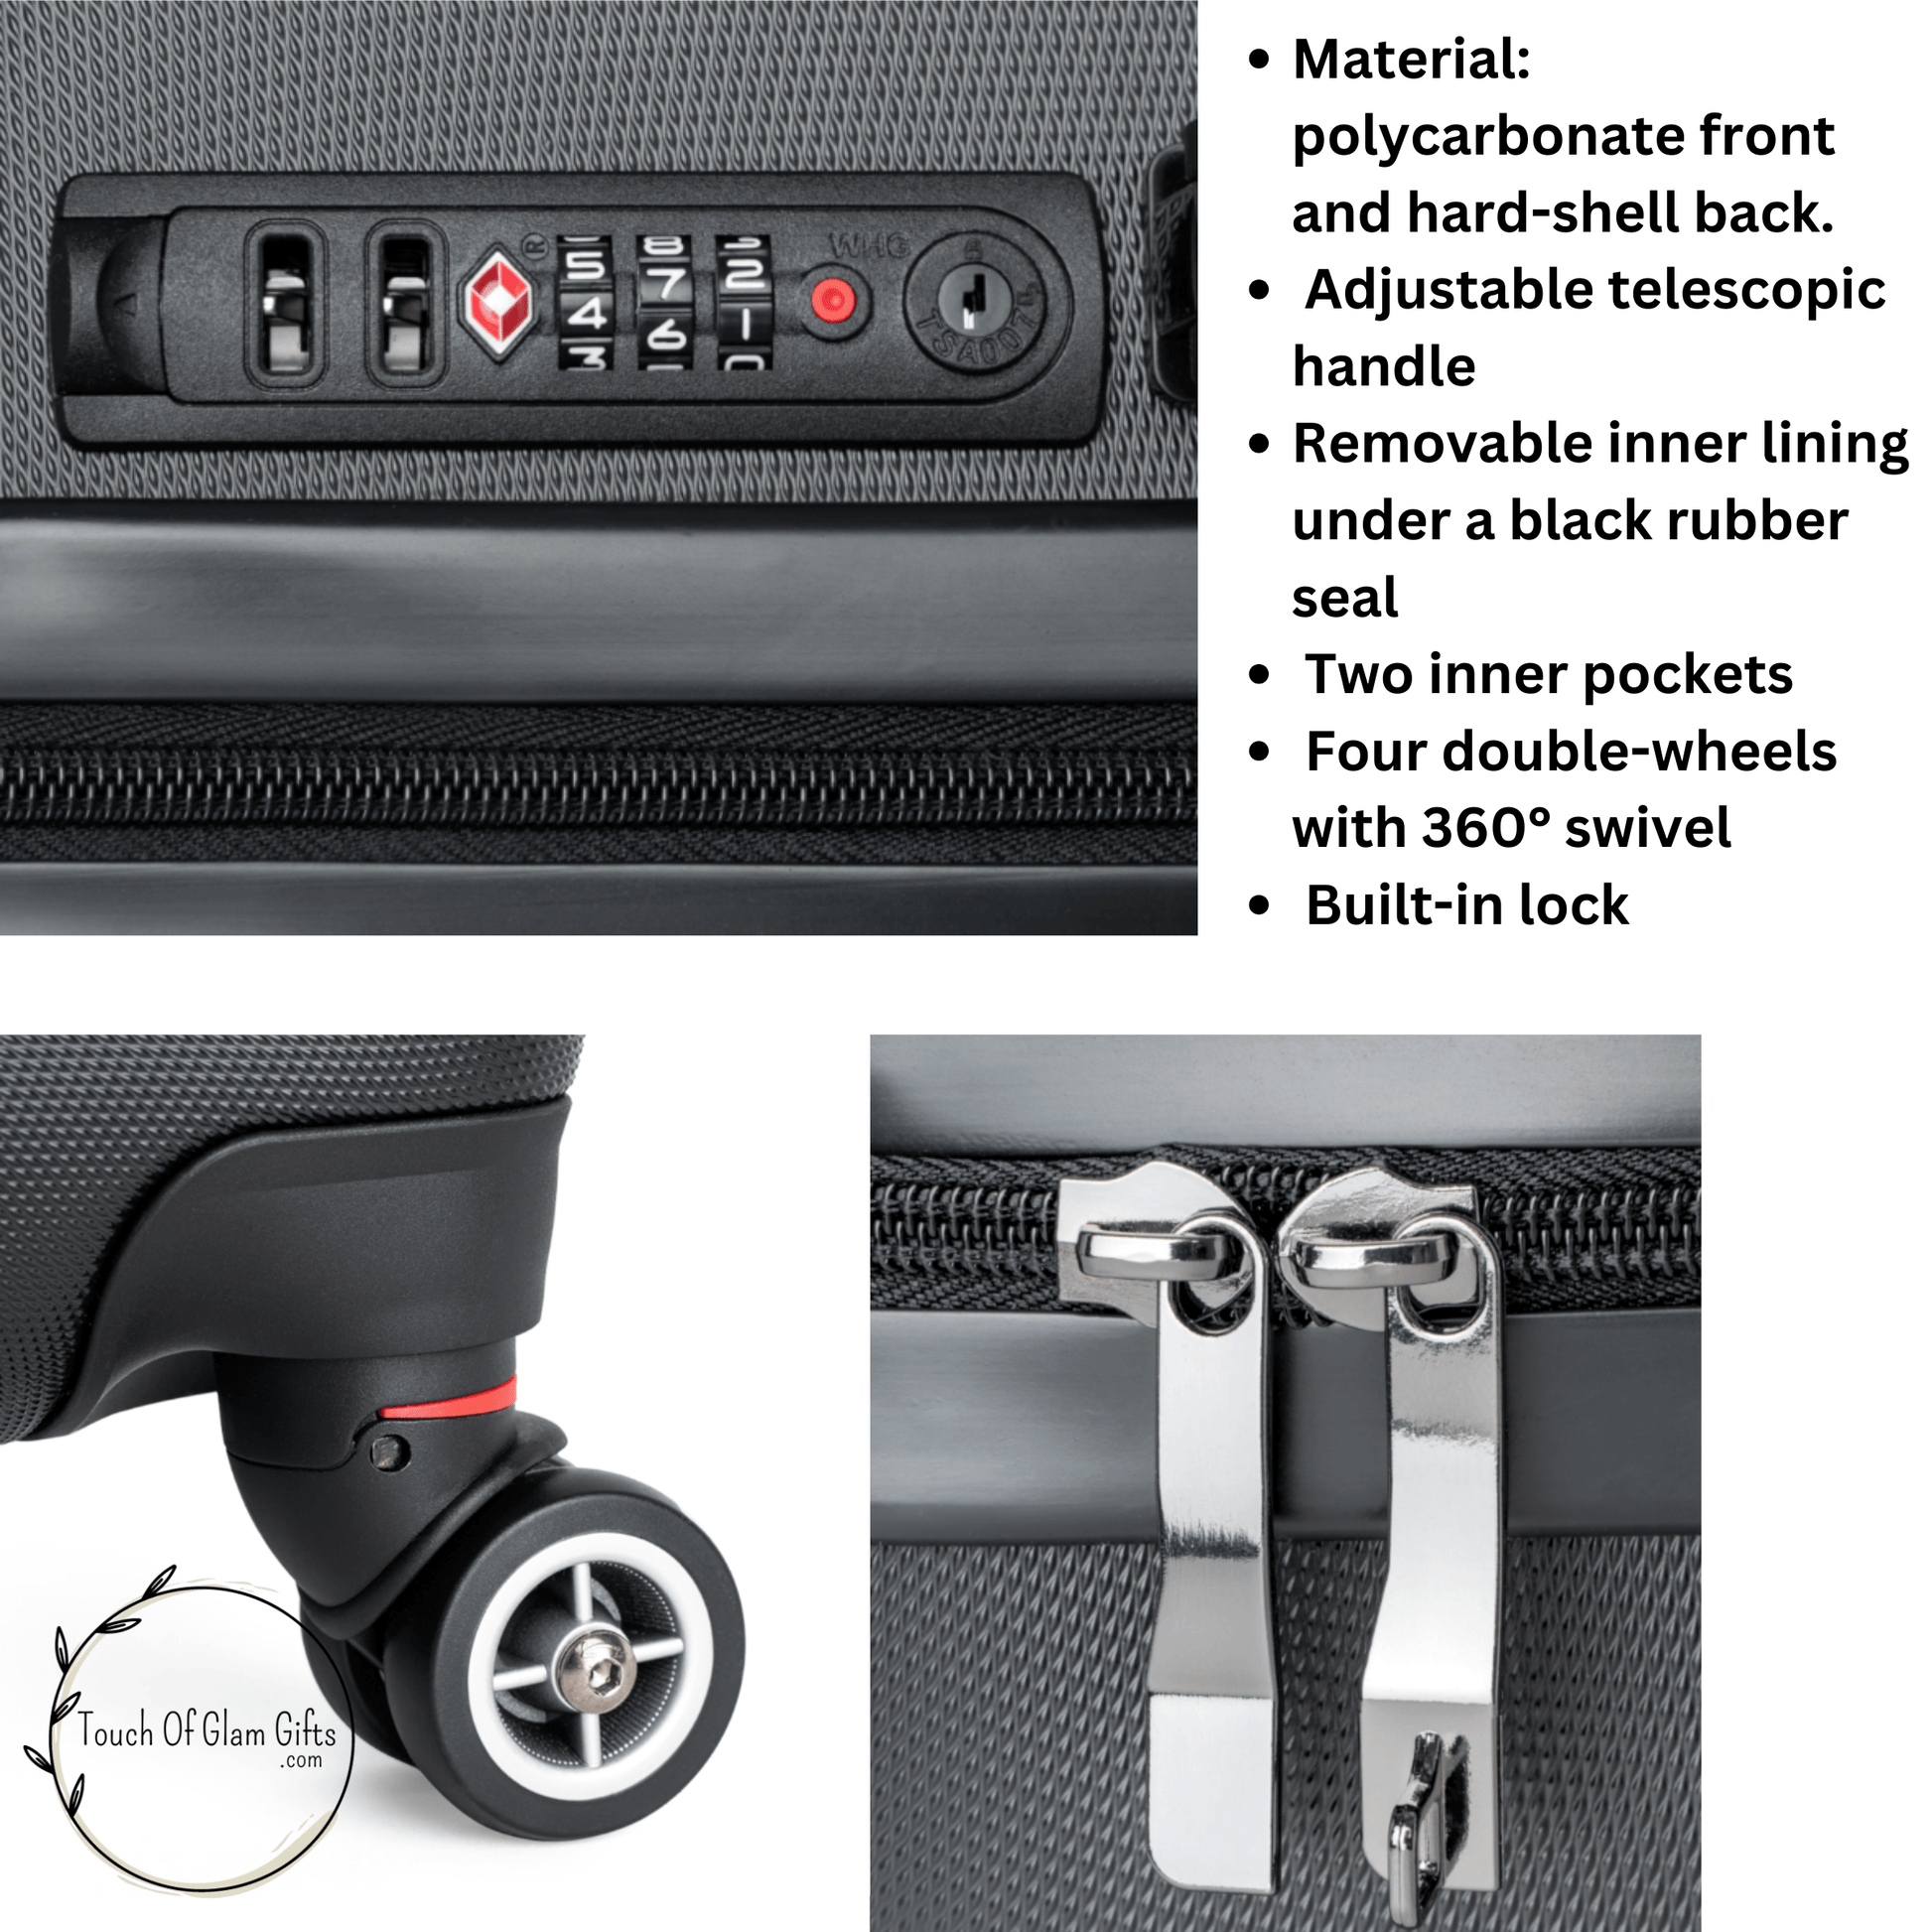 The double wheels on all our luggage, the quality zipper and reprogrammable lock with tsa lock.